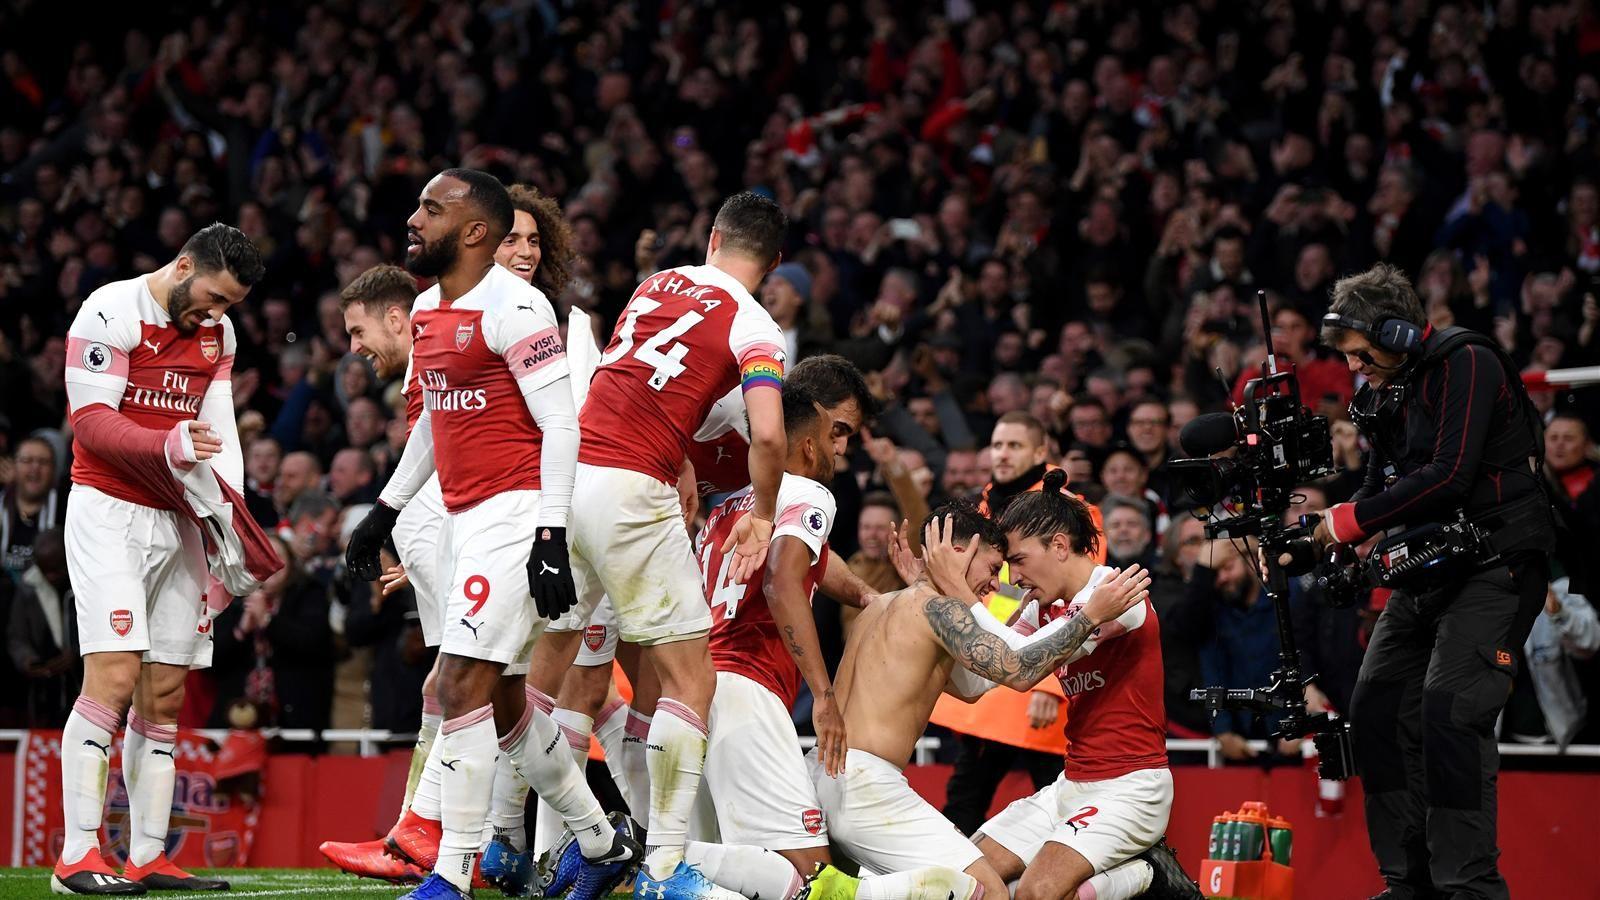 A wind of madness and Arsenal overthrow Tottenham to afford